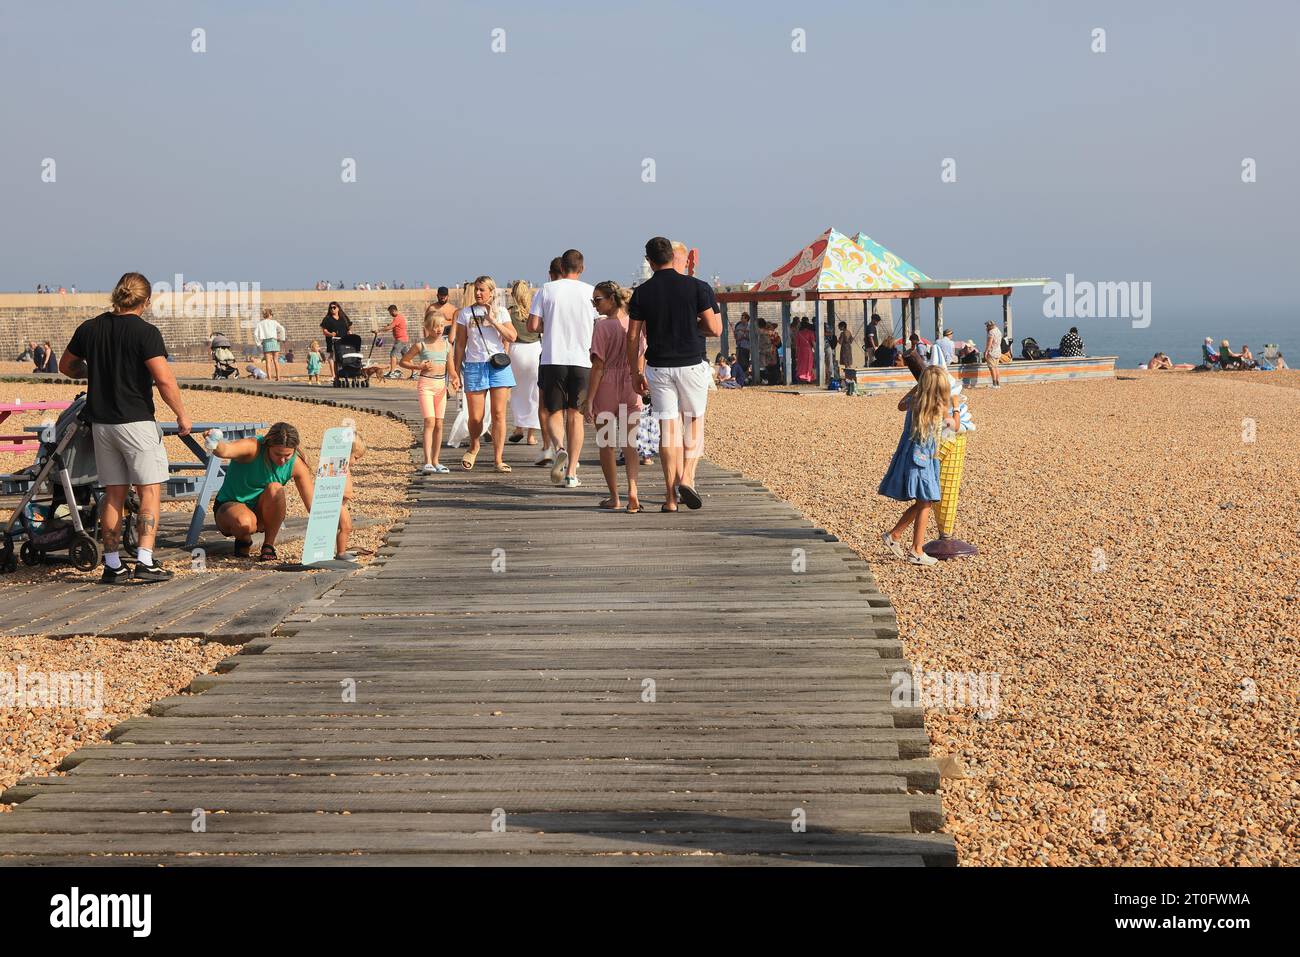 The boardwalk, using the harbour's heritage, old railway sleepers from the station that stopped at the harbour for the pier, forming a beach path. Stock Photo